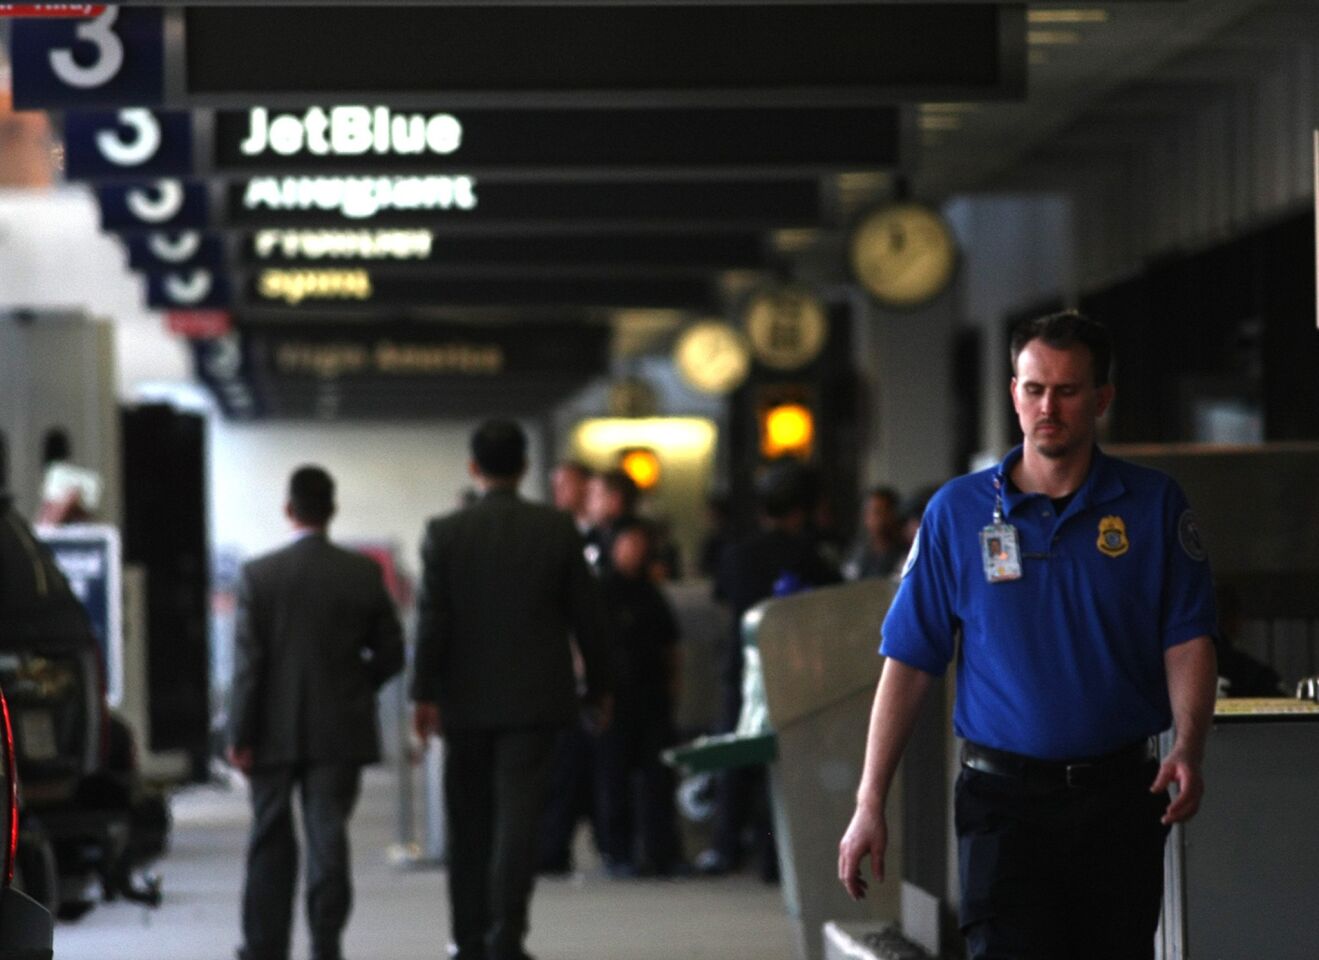 A TSA agent is absorbed in thought as he walks through Terminal 3 at Los Angeles International Airport.